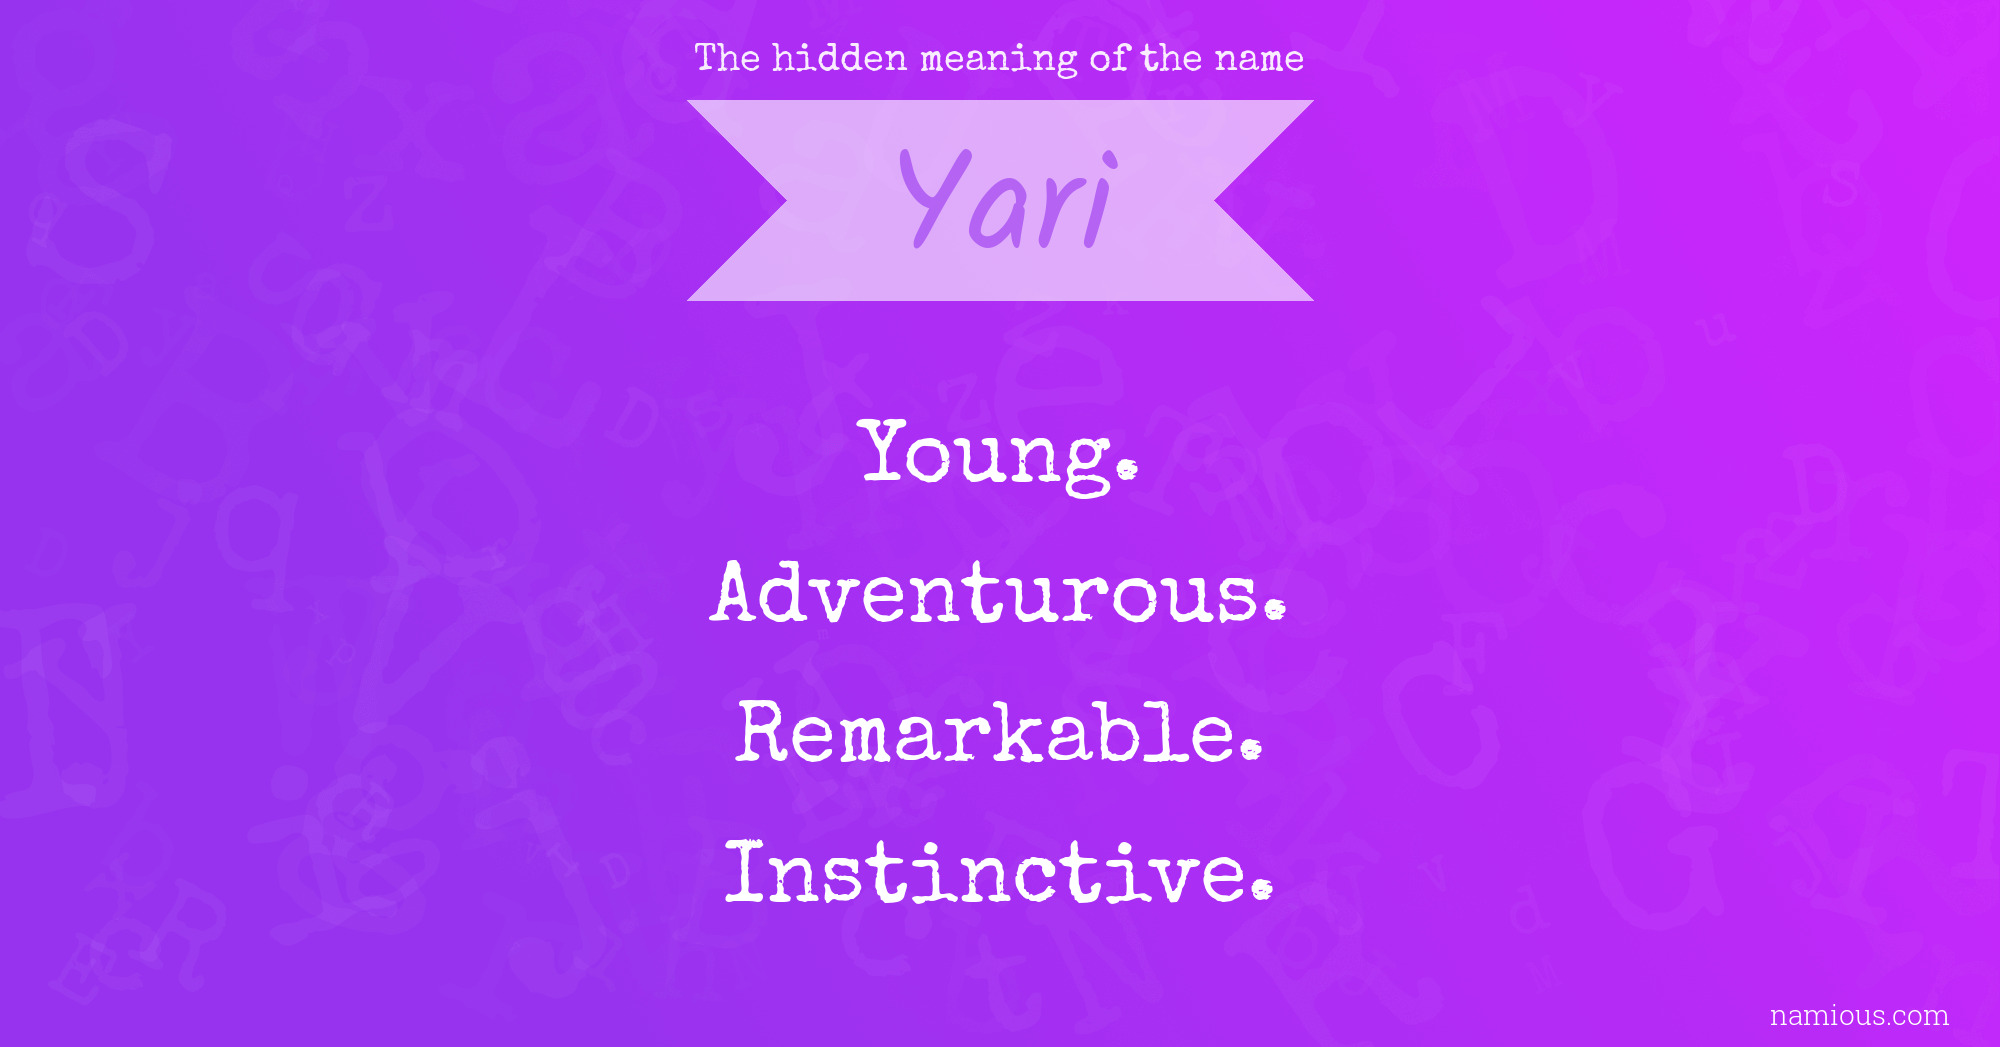 The hidden meaning of the name Yari